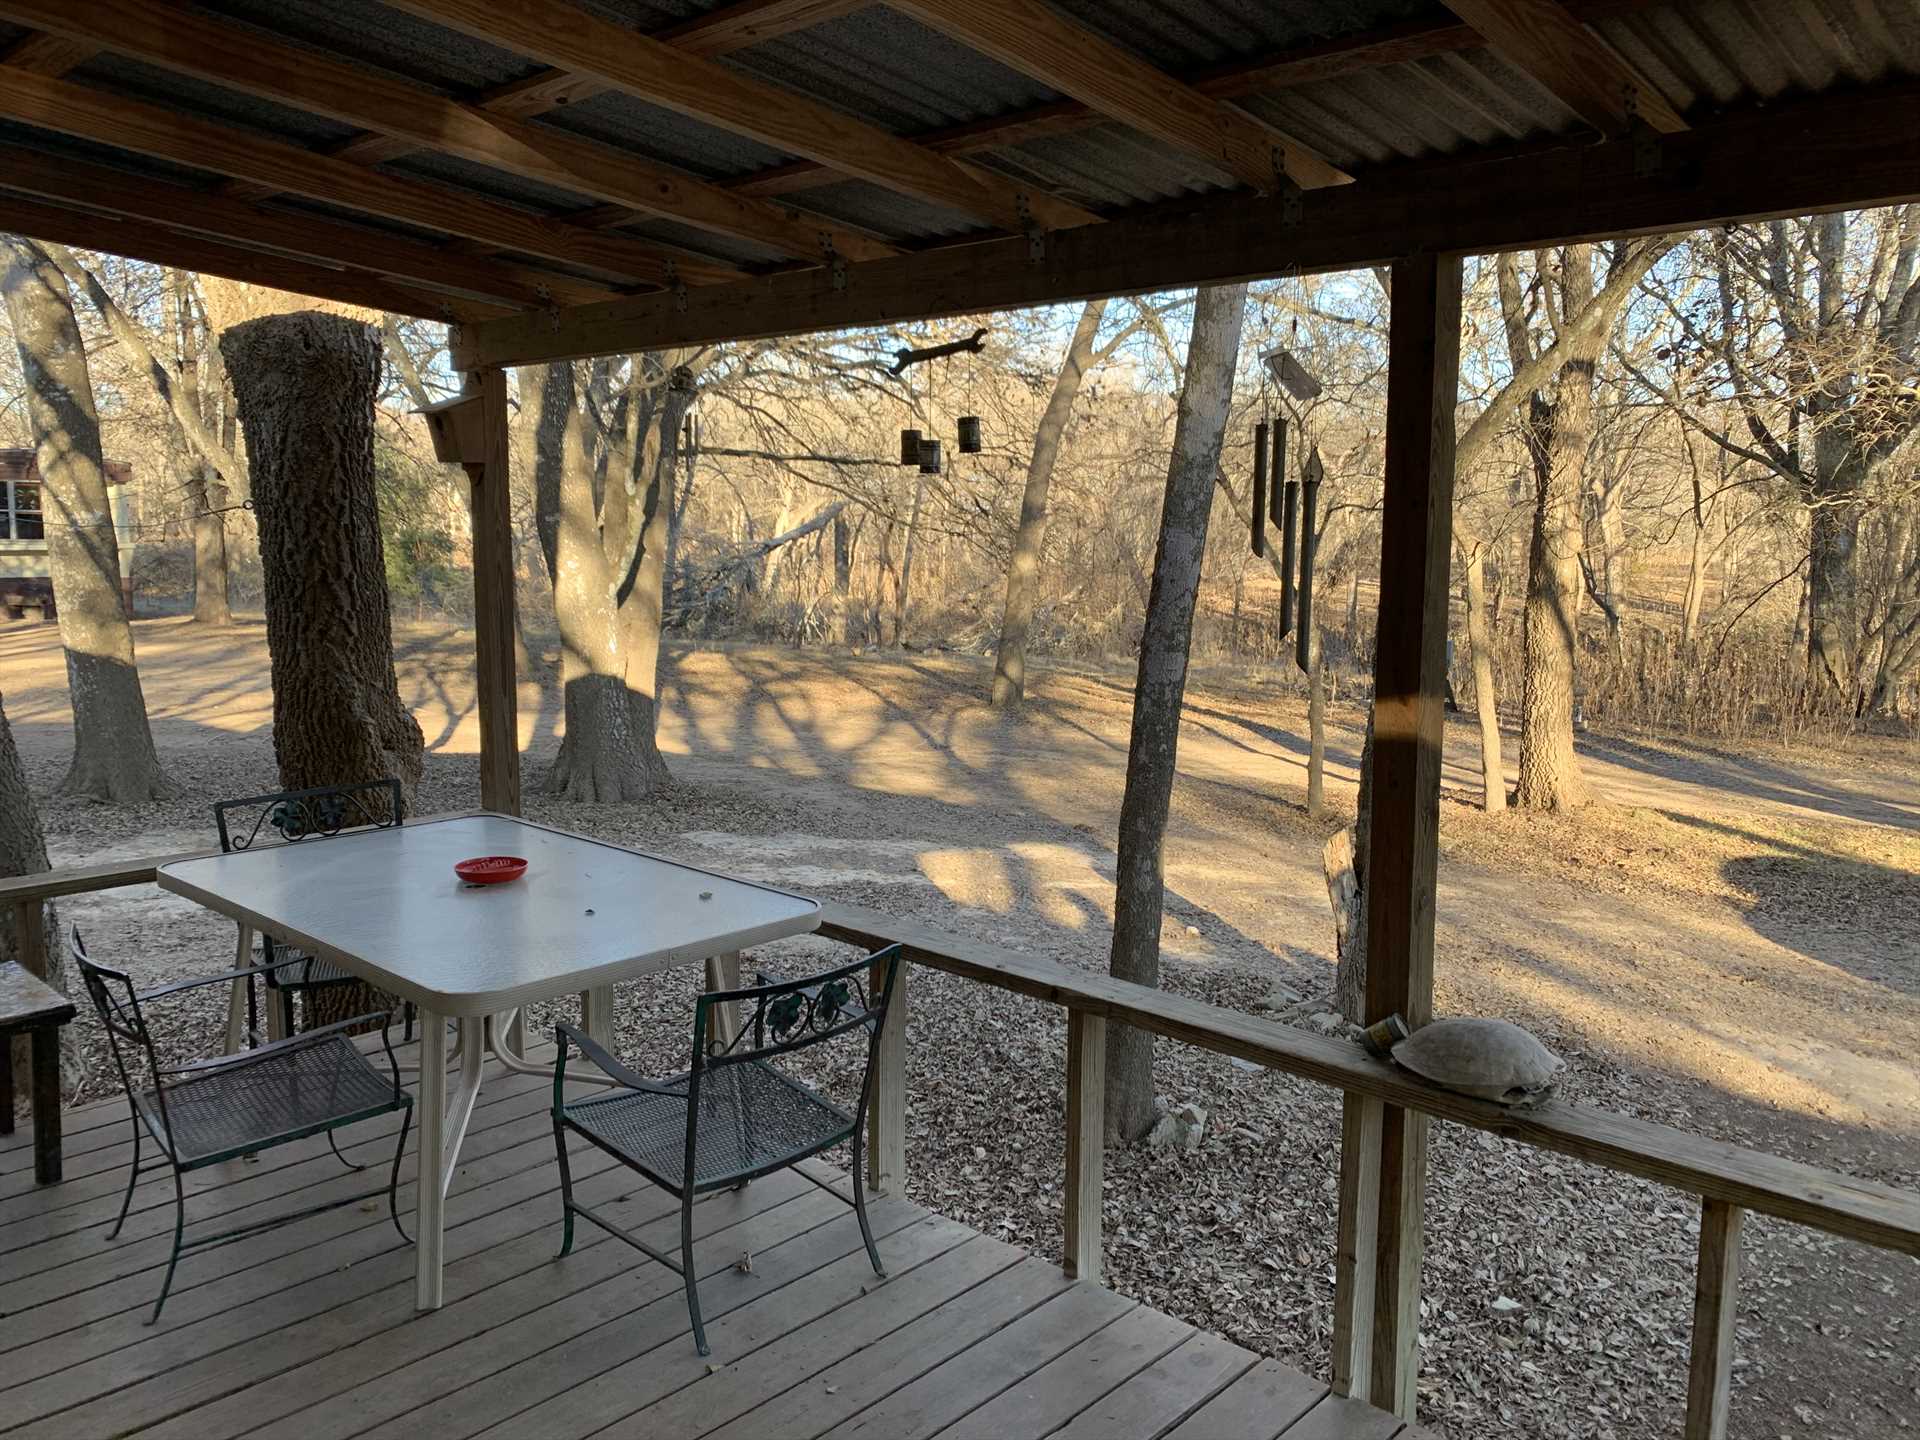                                                 You can almost hear the wind chimes! The shaded patio is a great spot to watch wildlife and admire some of the Hill Country's natural beauty.